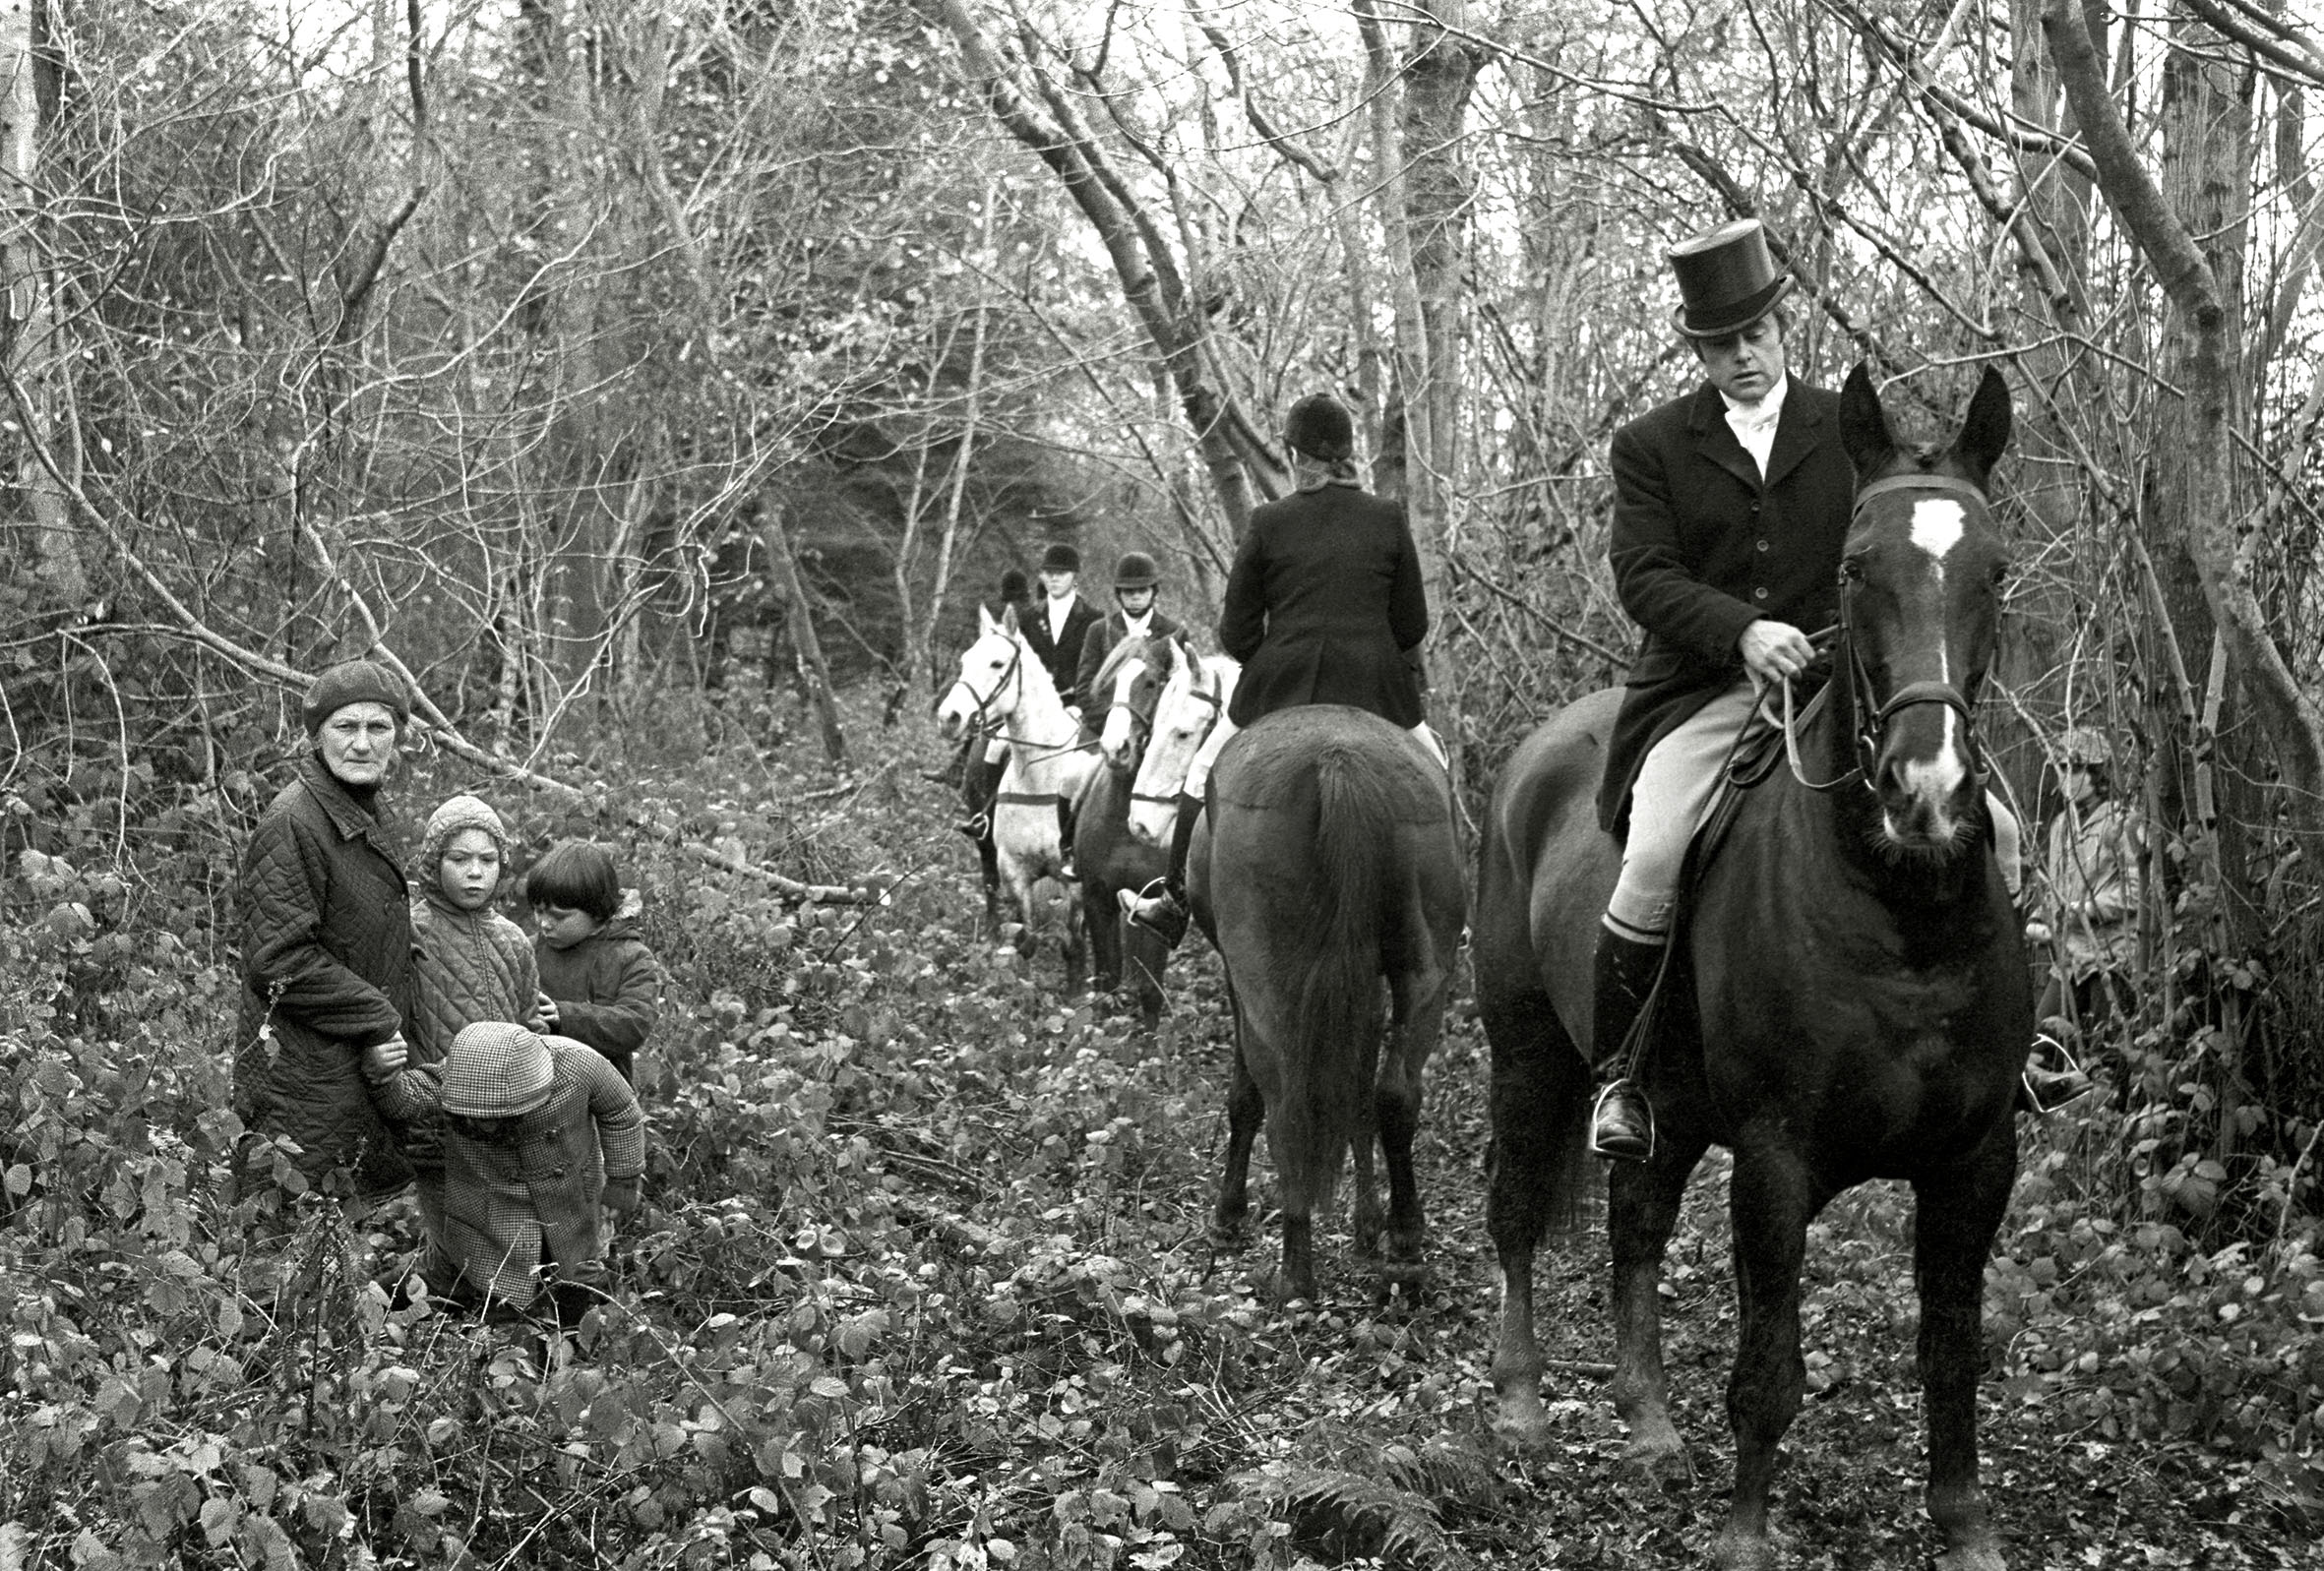 A hunt taking place in Monmouthshire, Wales, 1975